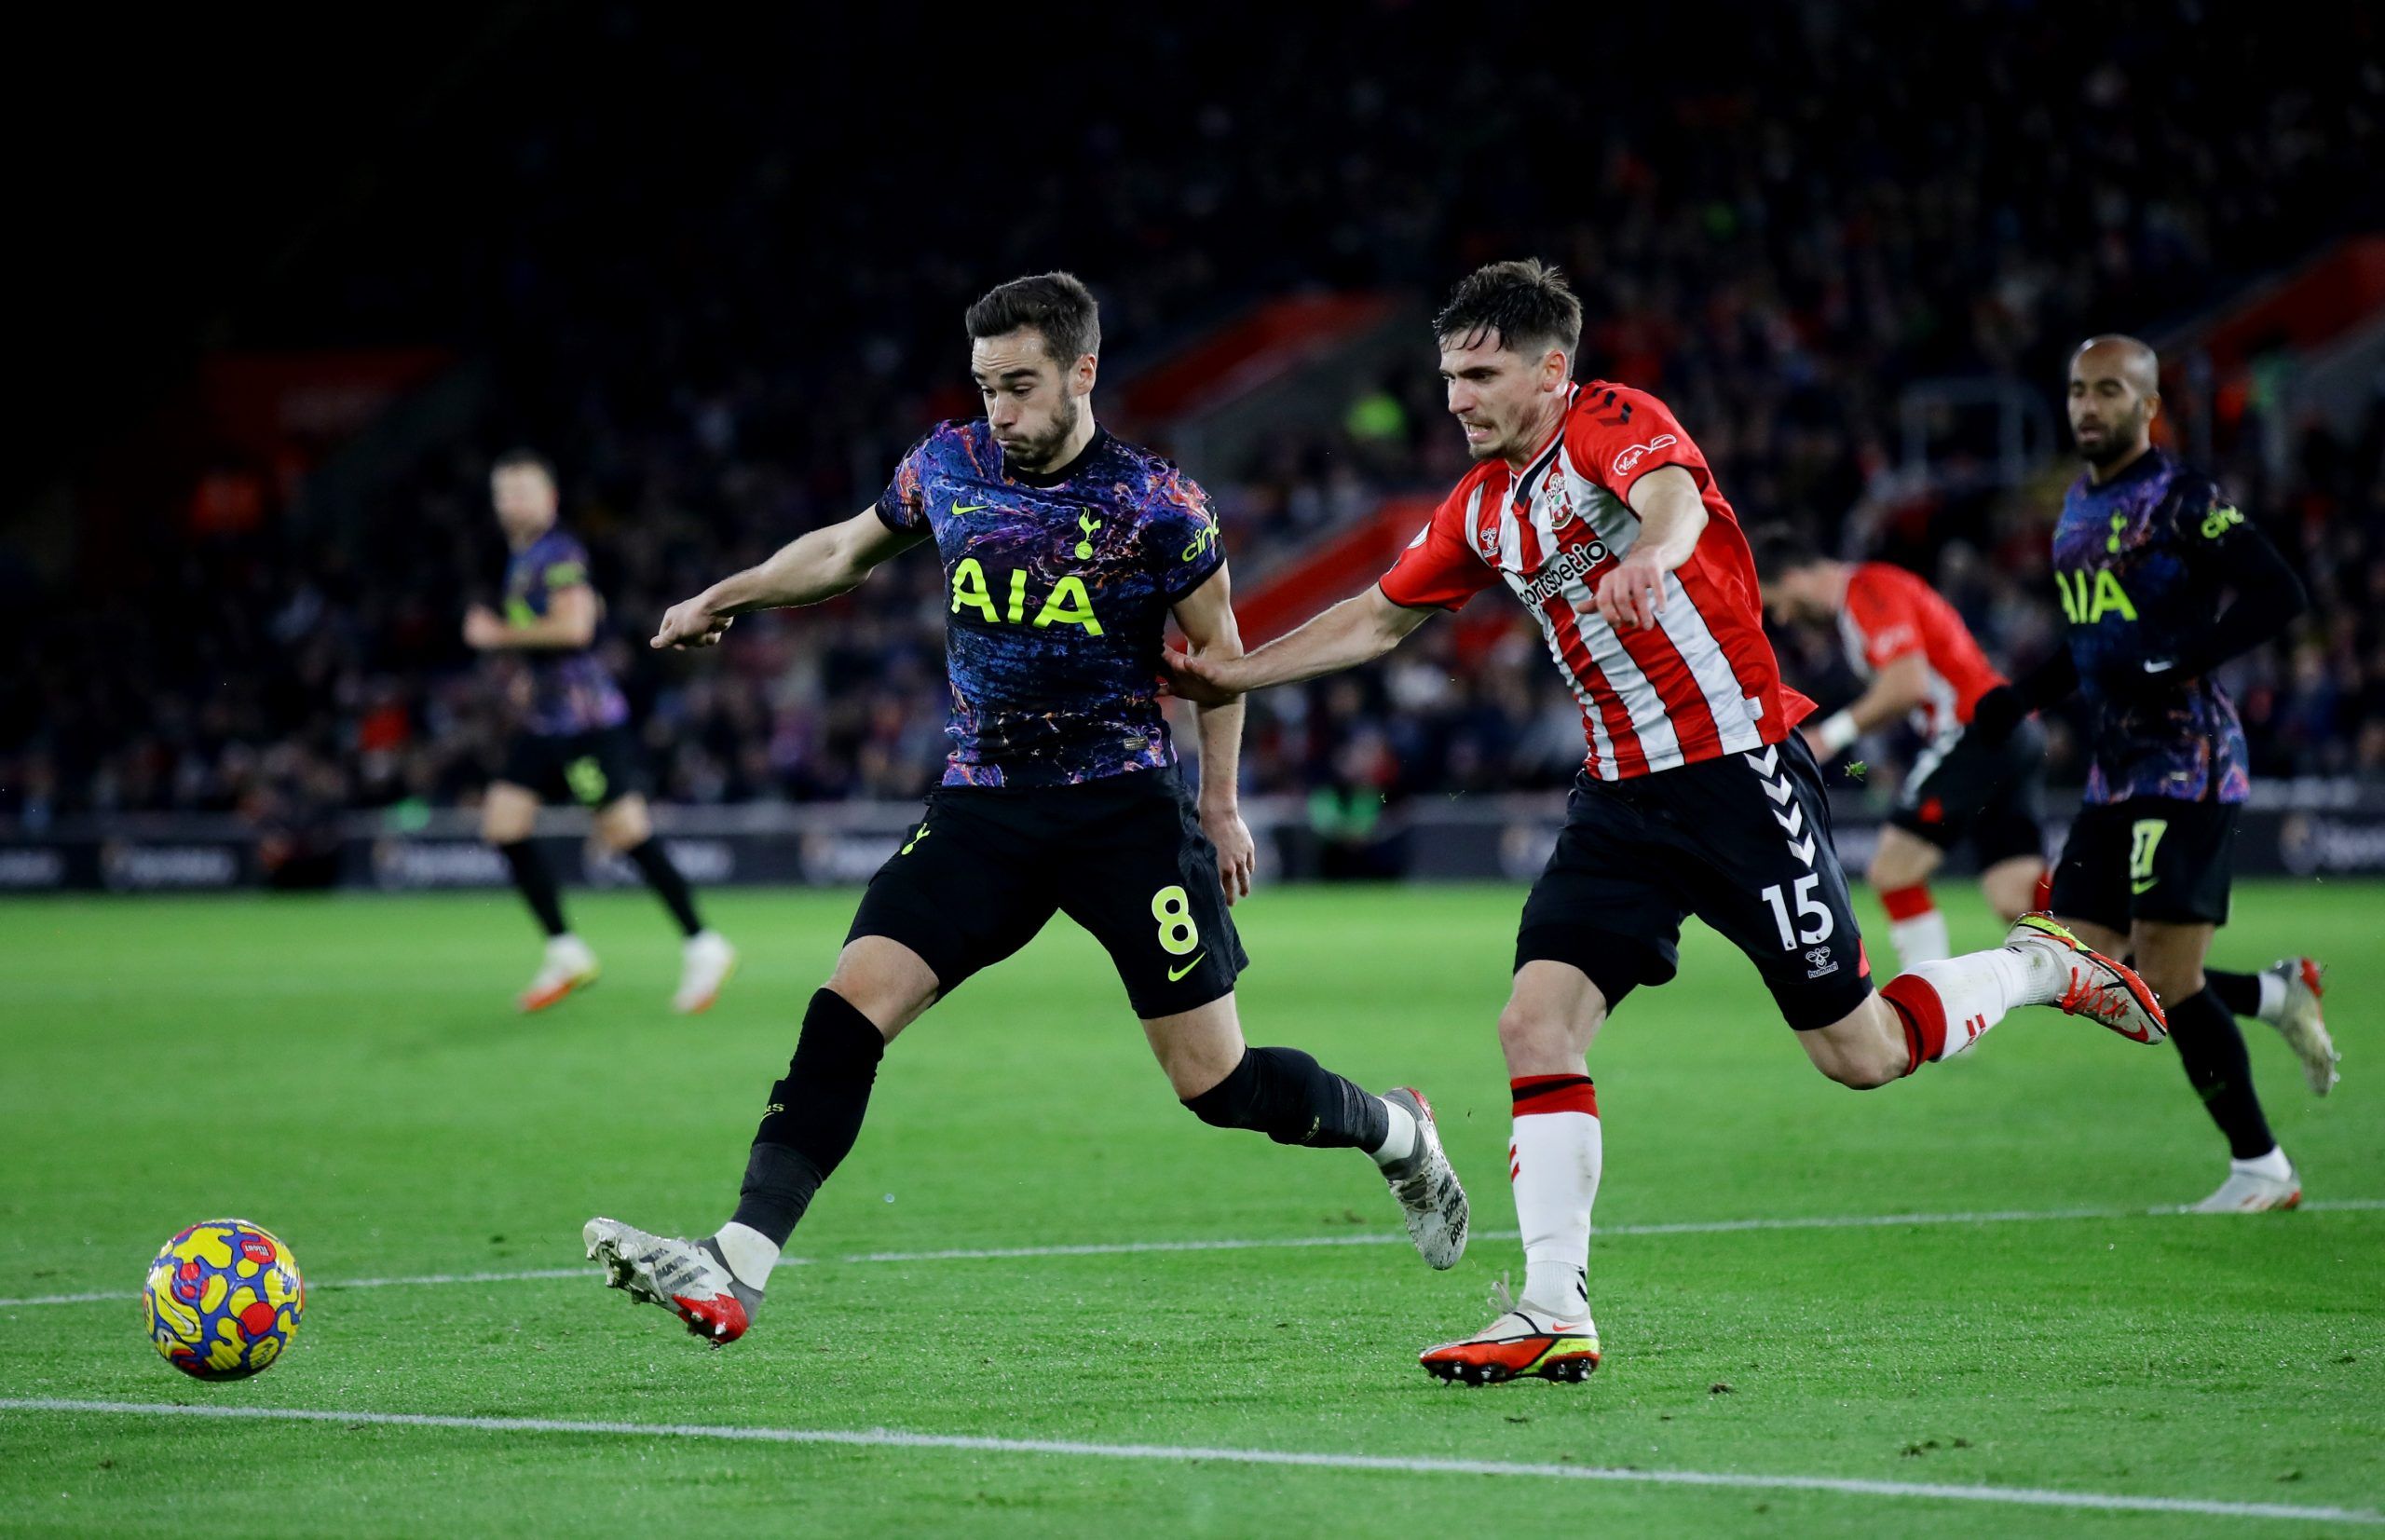 Soccer Football - Premier League - Southampton v Tottenham Hotspur - St Mary's Stadium, Southampton, Britain - December 28, 2021 Tottenham Hotspur's Harry Winks in action with Southampton's Romain Perraud REUTERS/David Klein EDITORIAL USE ONLY. No use with unauthorized audio, video, data, fixture lists, club/league logos or 'live' services. Online in-match use limited to 75 images, no video emulation. No use in betting, games or single club /league/player publications.  Please contact your accou